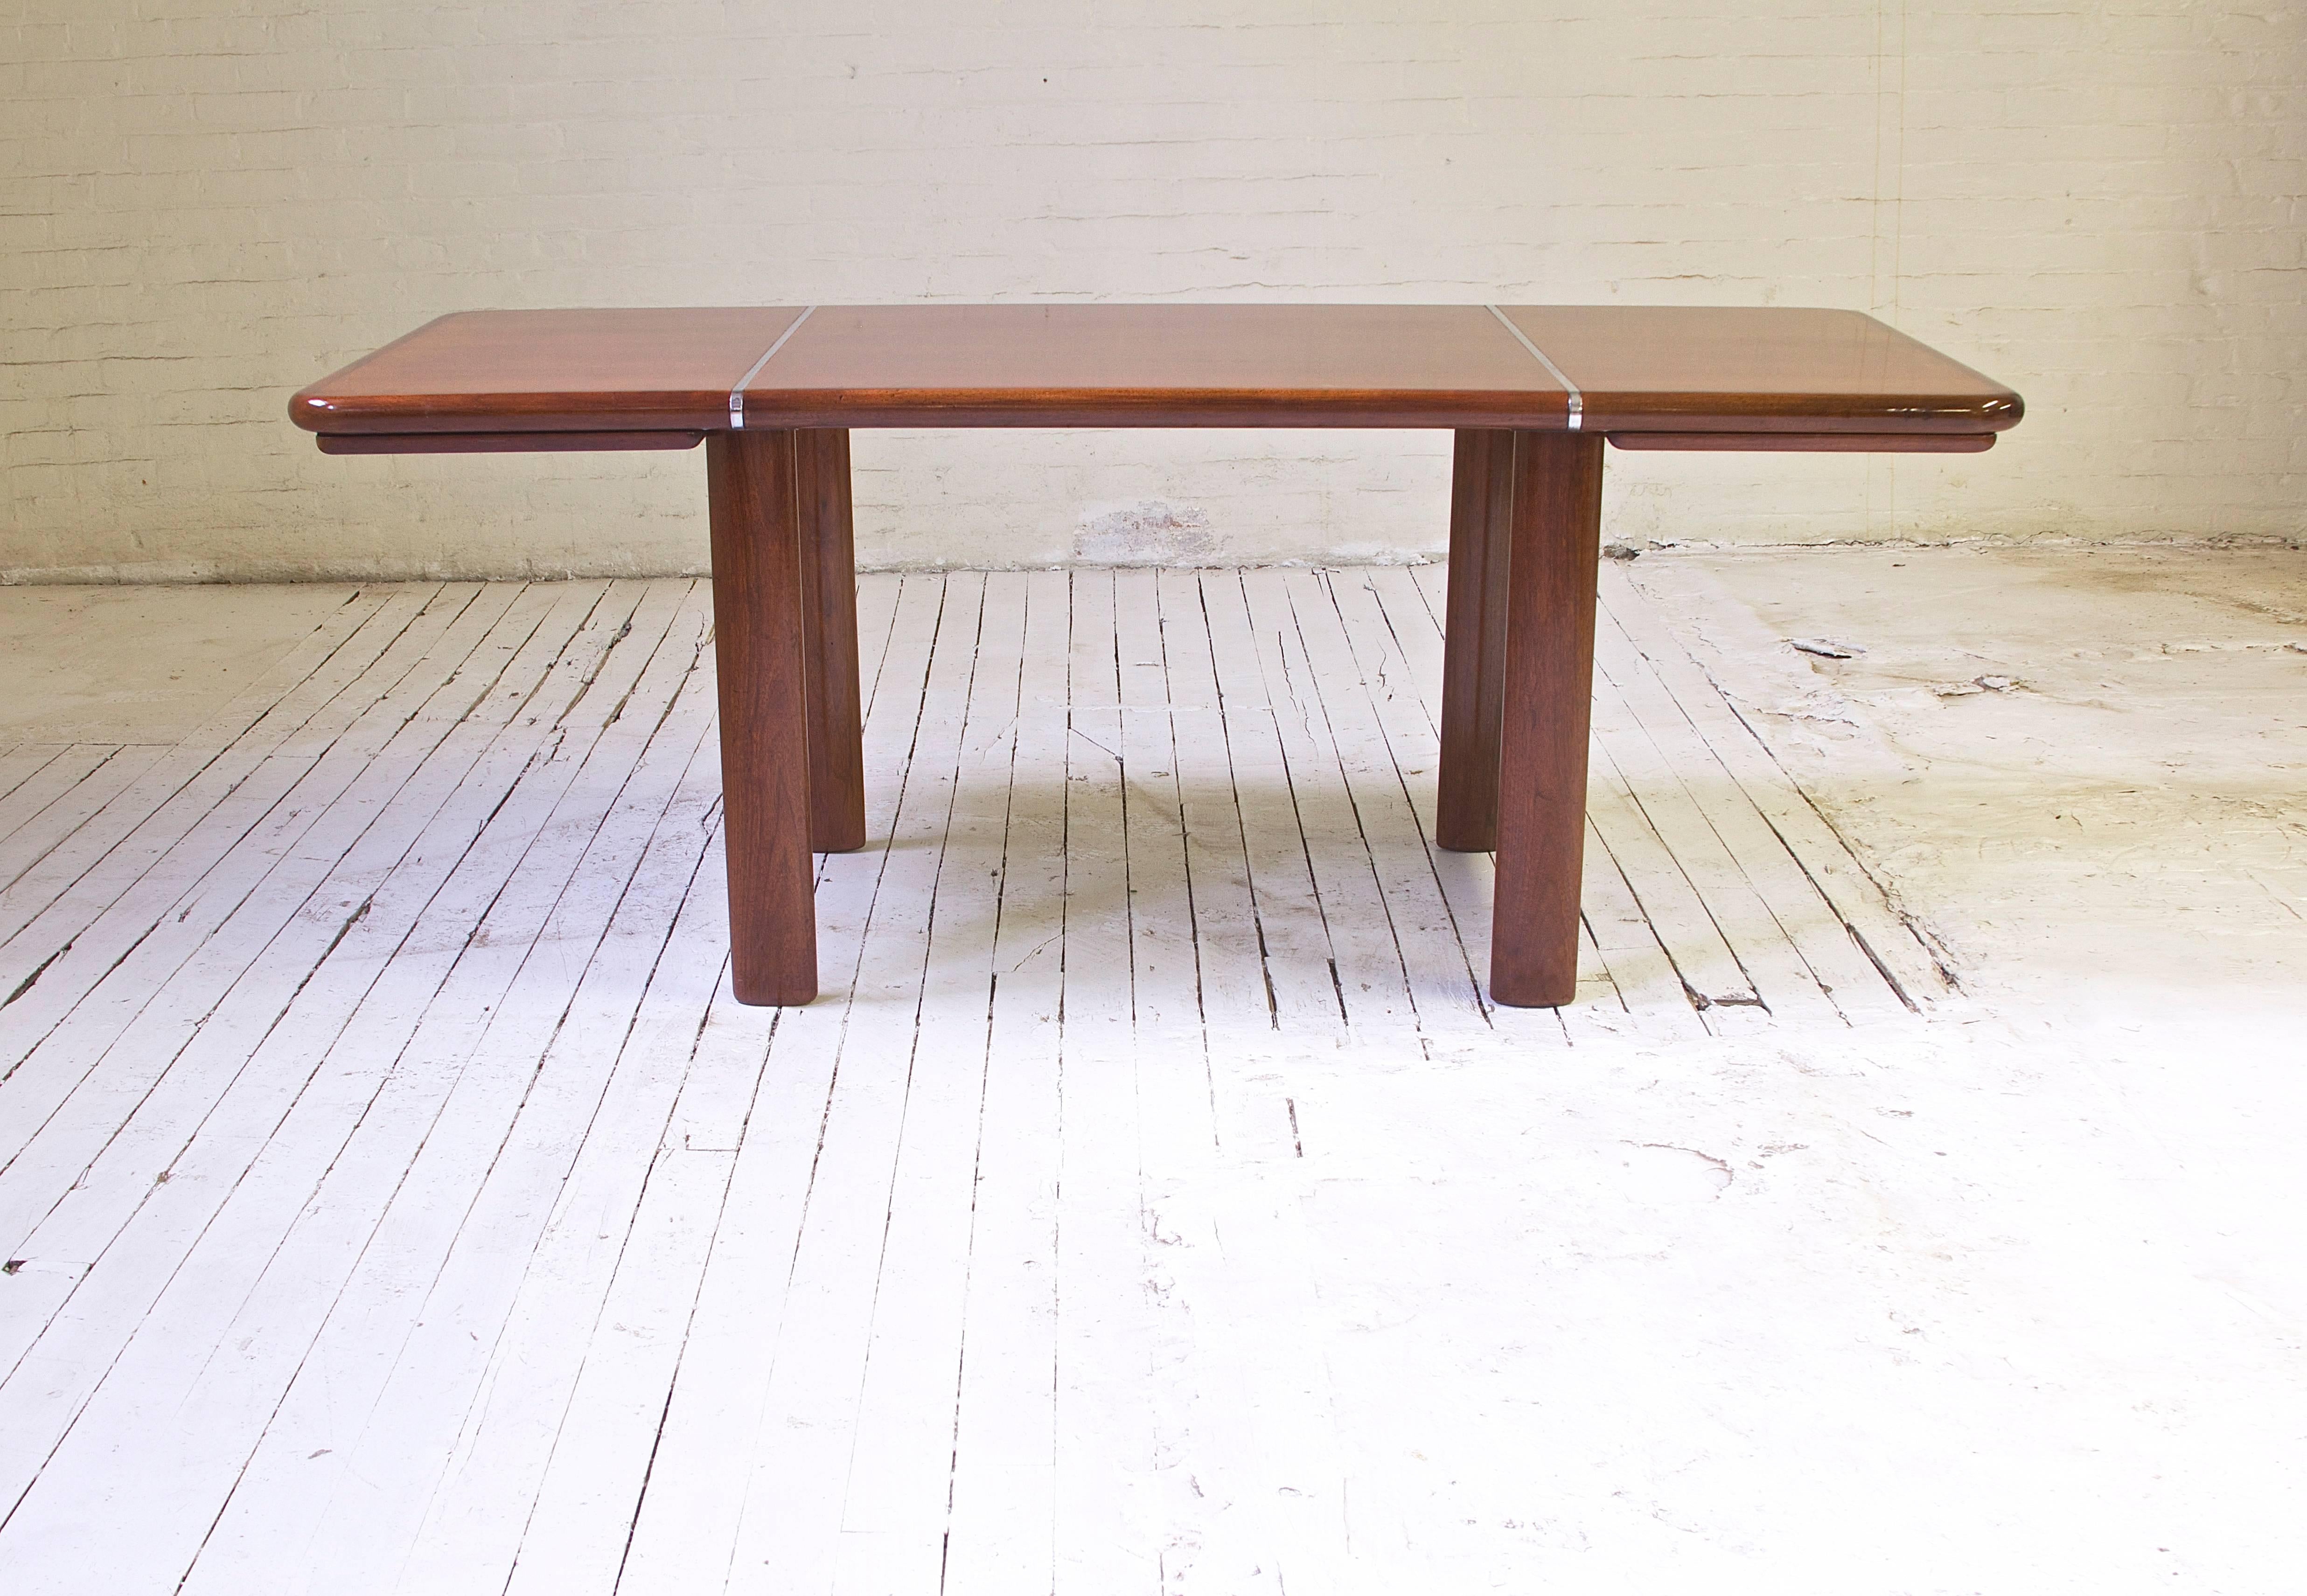 Elegant 1970s Italian writing table or desk by Saporiti with demon table solid Mahogany legs (with levelling leg-risers) and chrome accents. This table features two shallow compartmentalized drawers which can also be easily removed to allow for use